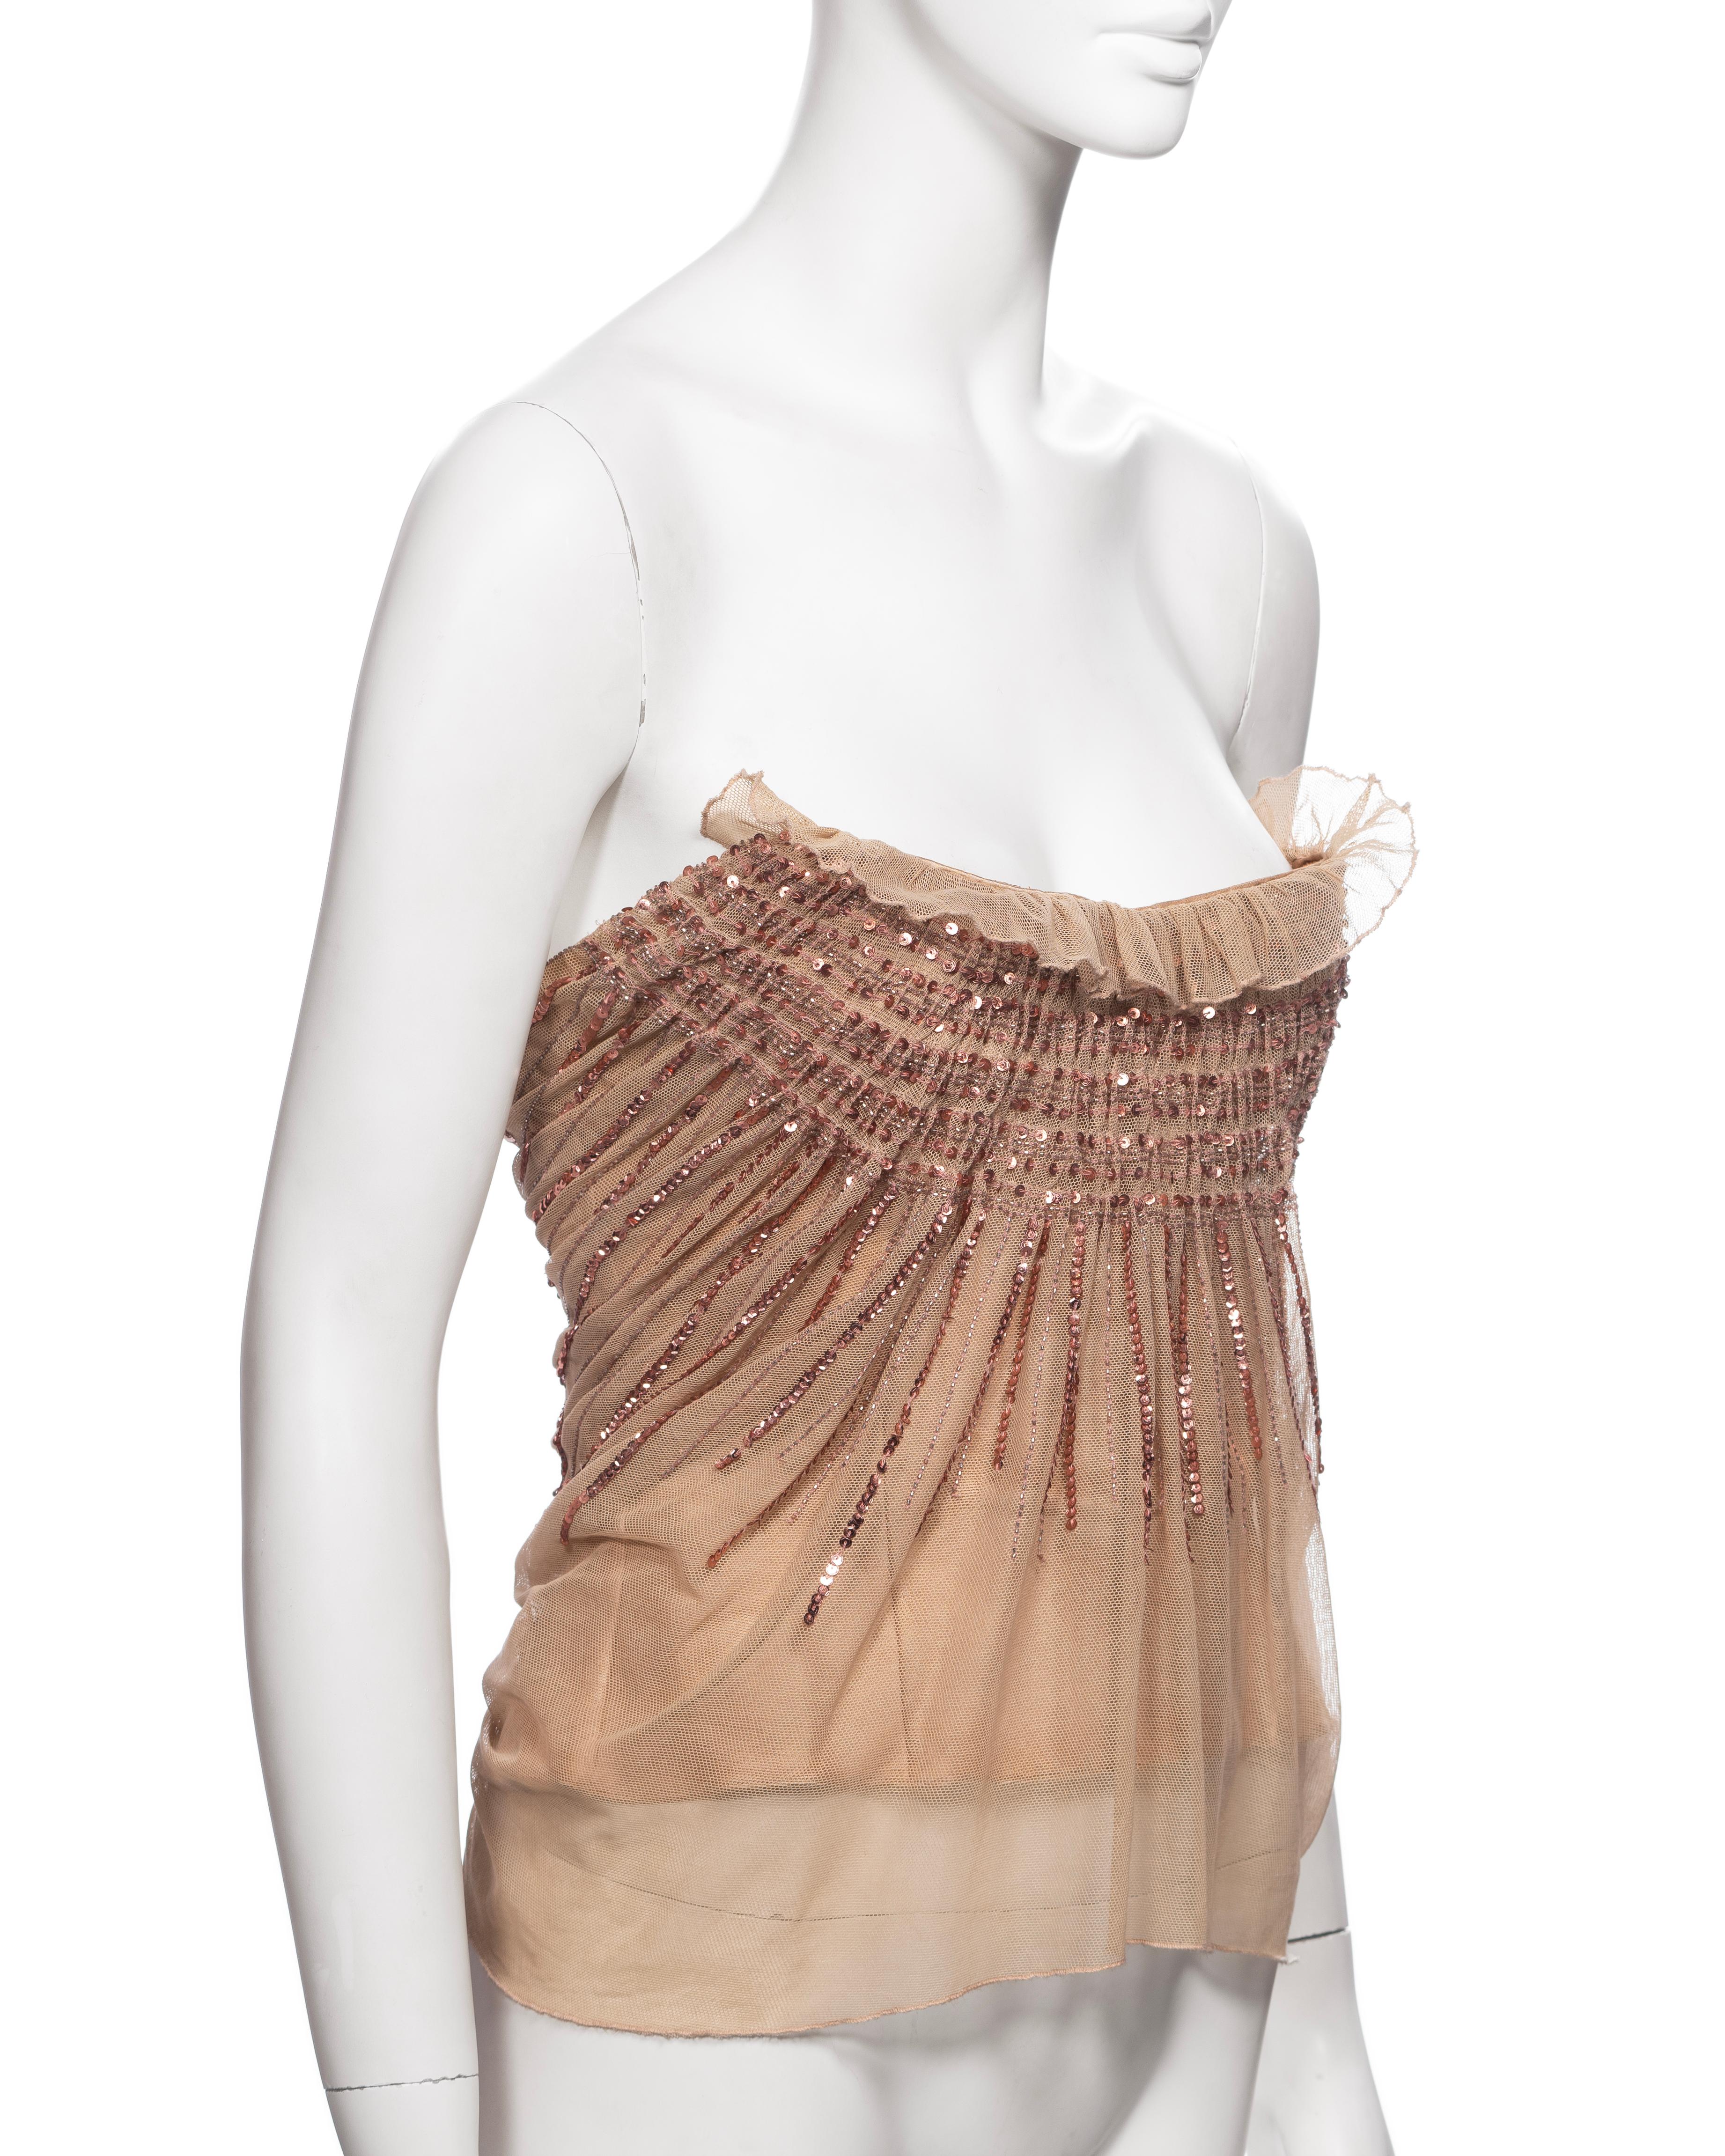 Christian Dior by John Galliano Nude Smocked Mesh and Sequin Corset Top, FW 2005 For Sale 4